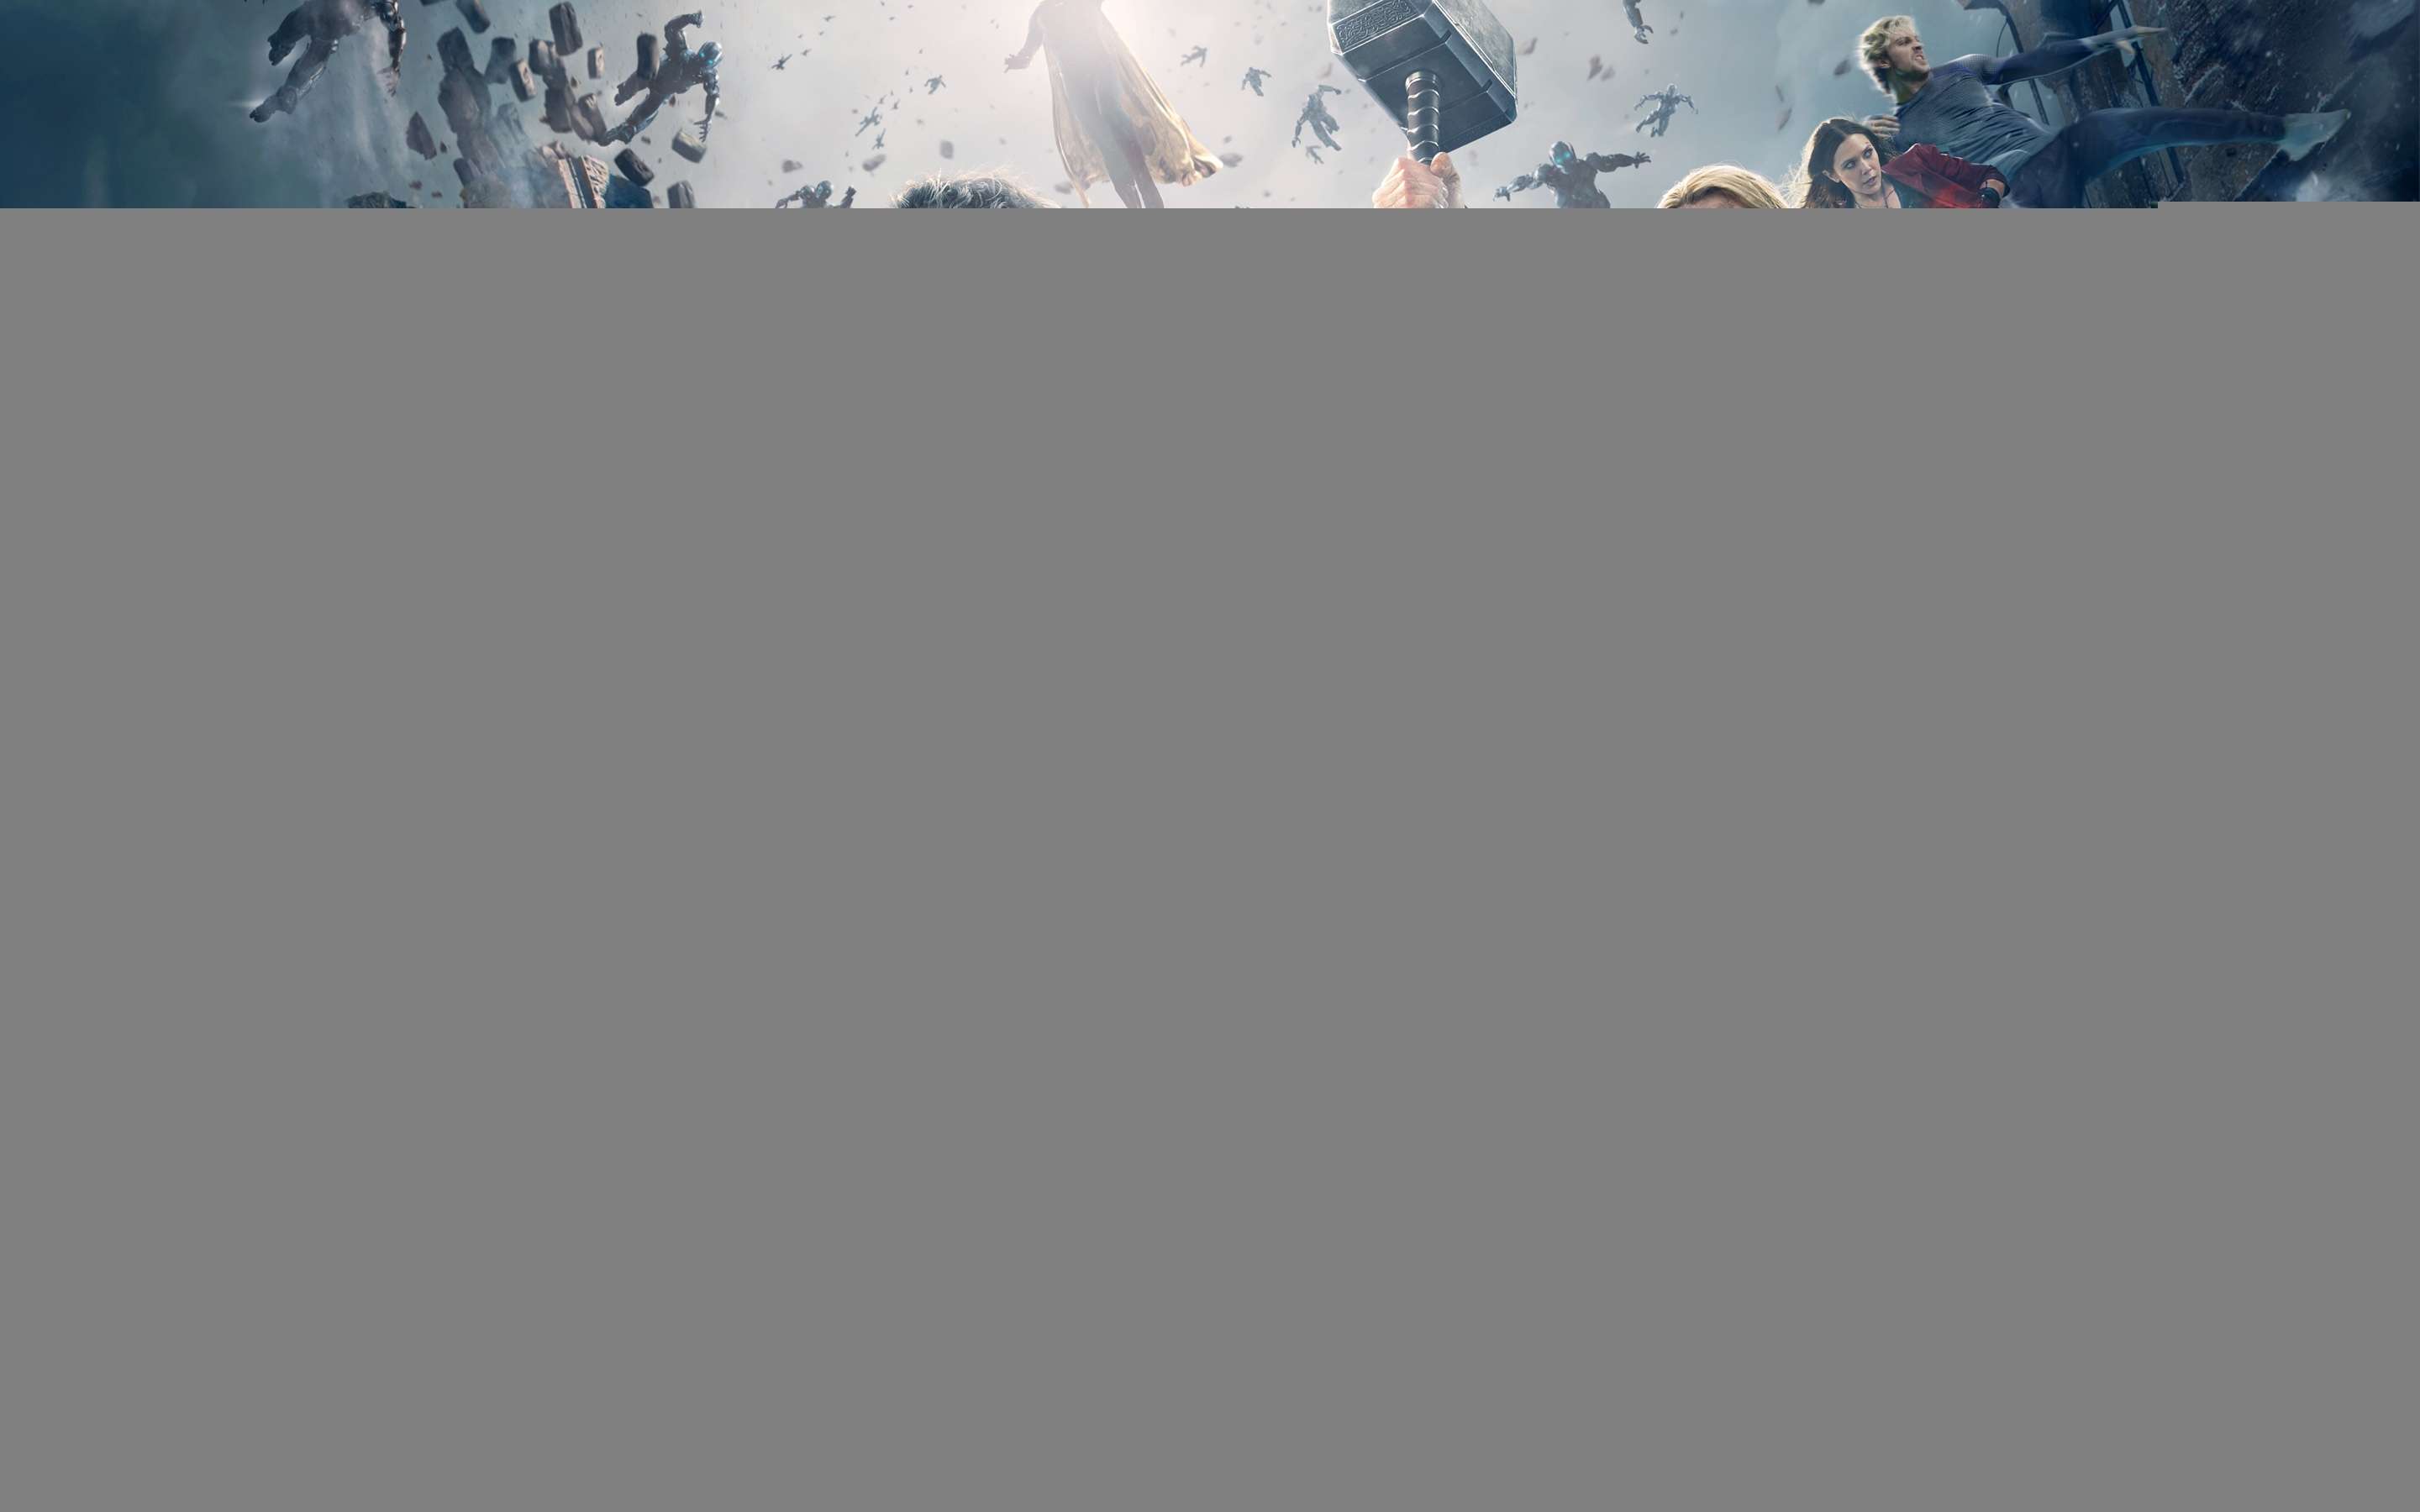 10 New Avengers Age Of Ultron Wallpaper FULL HD 1080p For PC Background